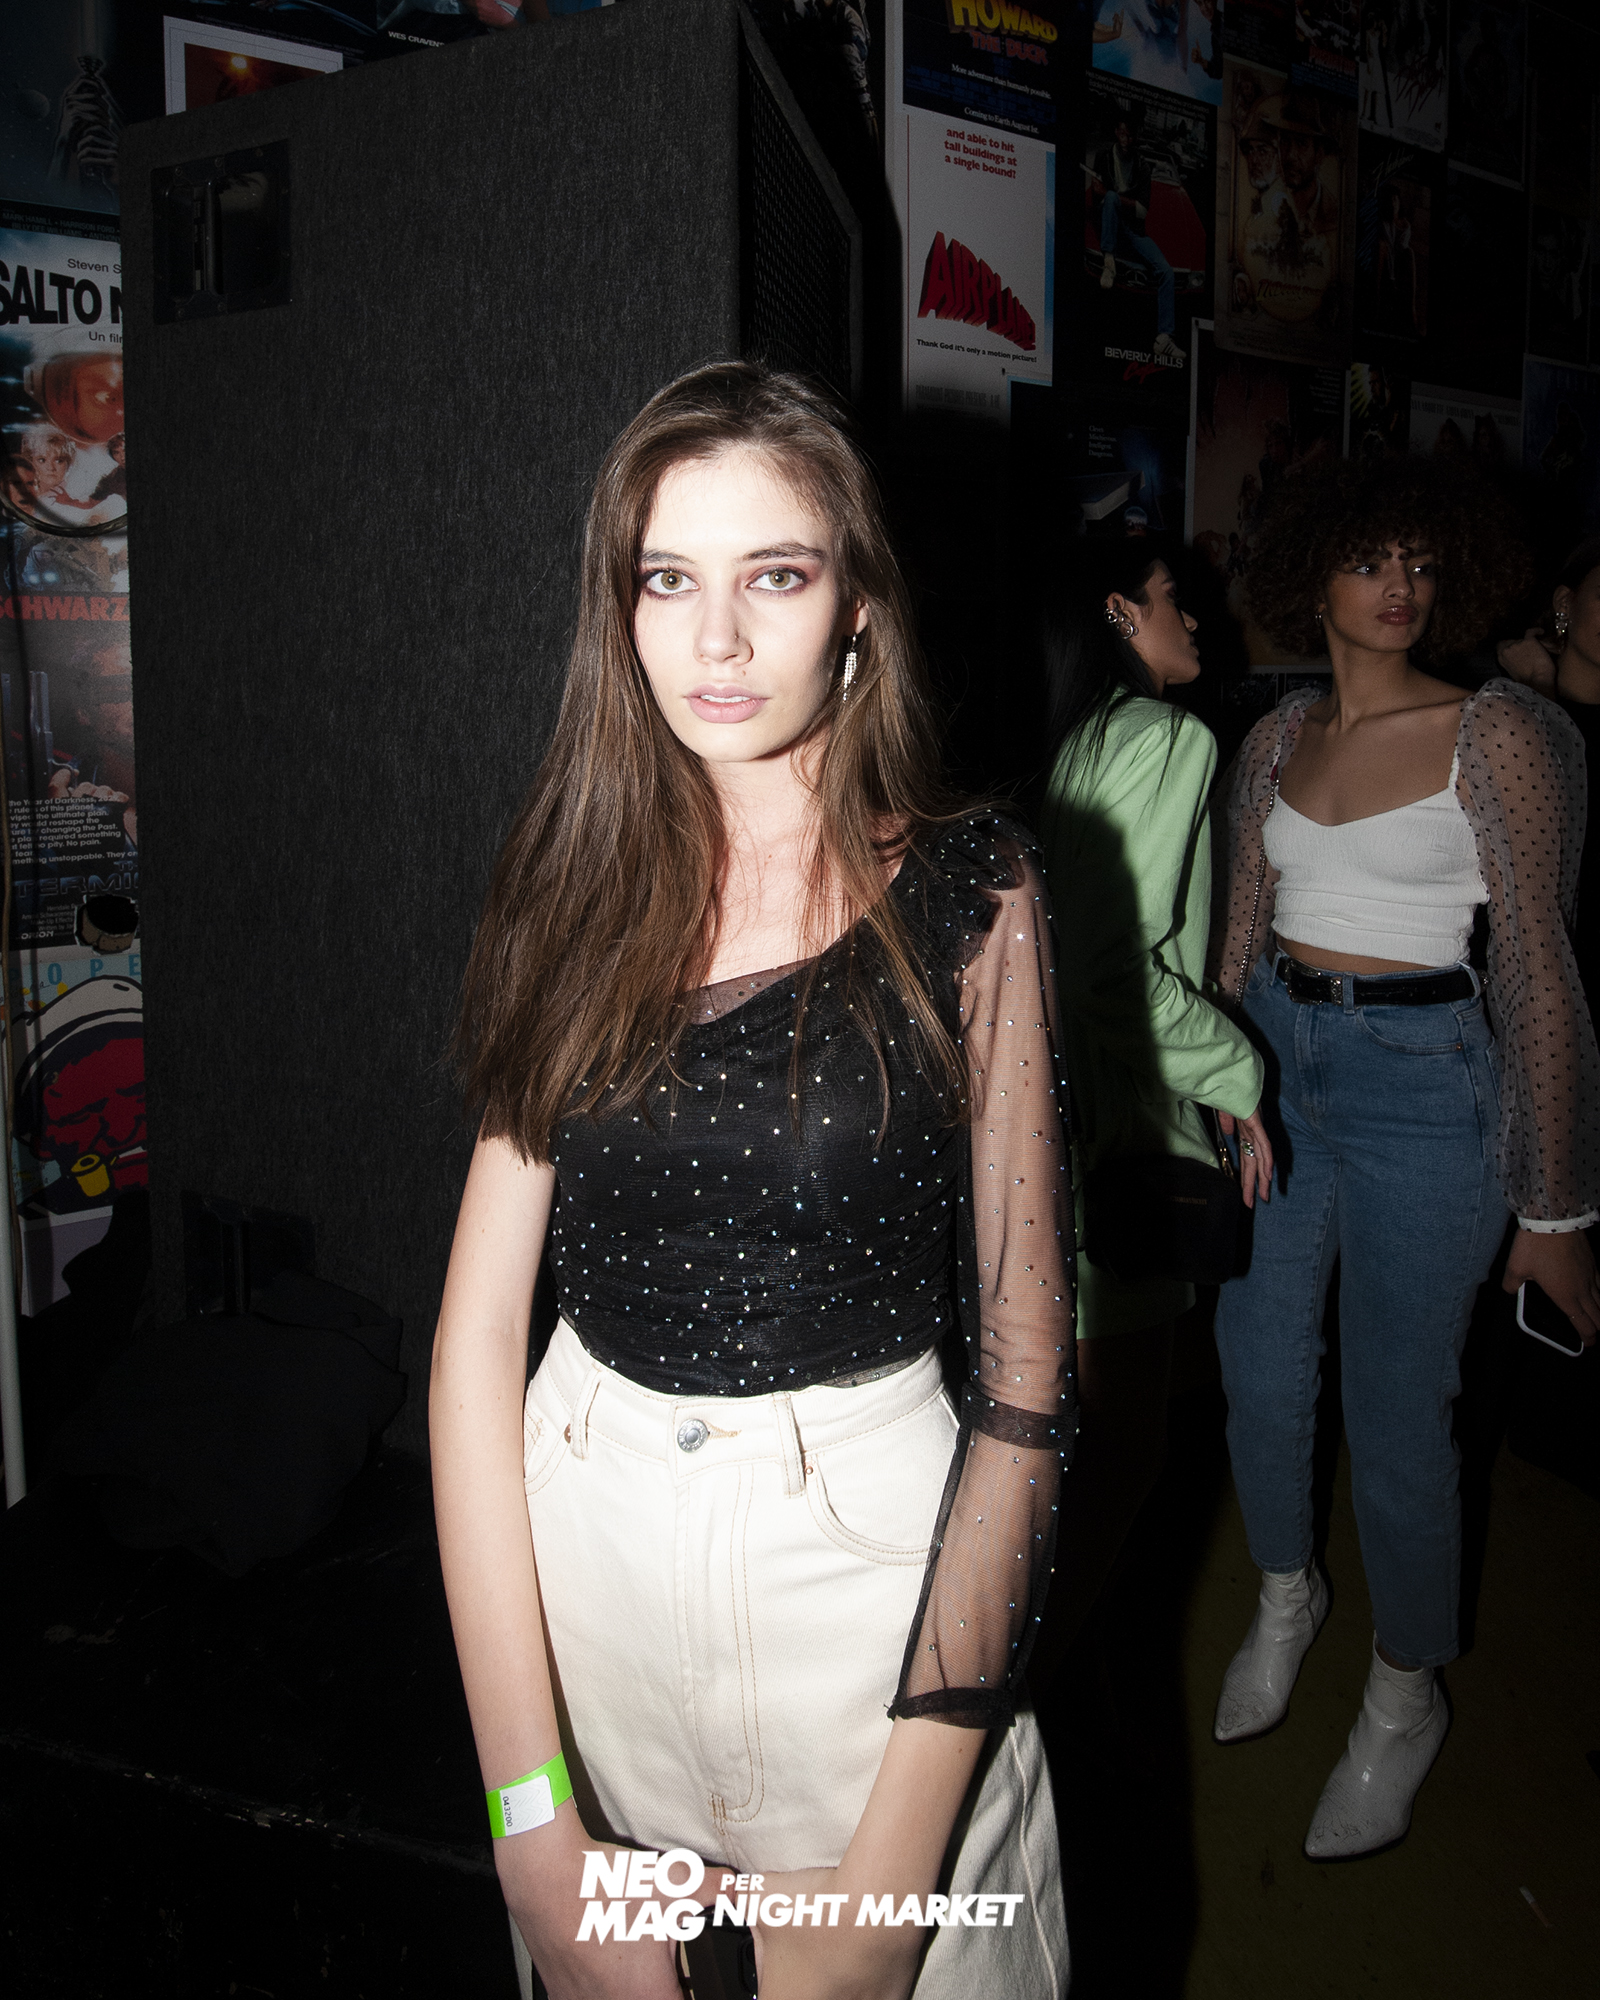 Cover Magazine Party Night Market 80 - Neomag.